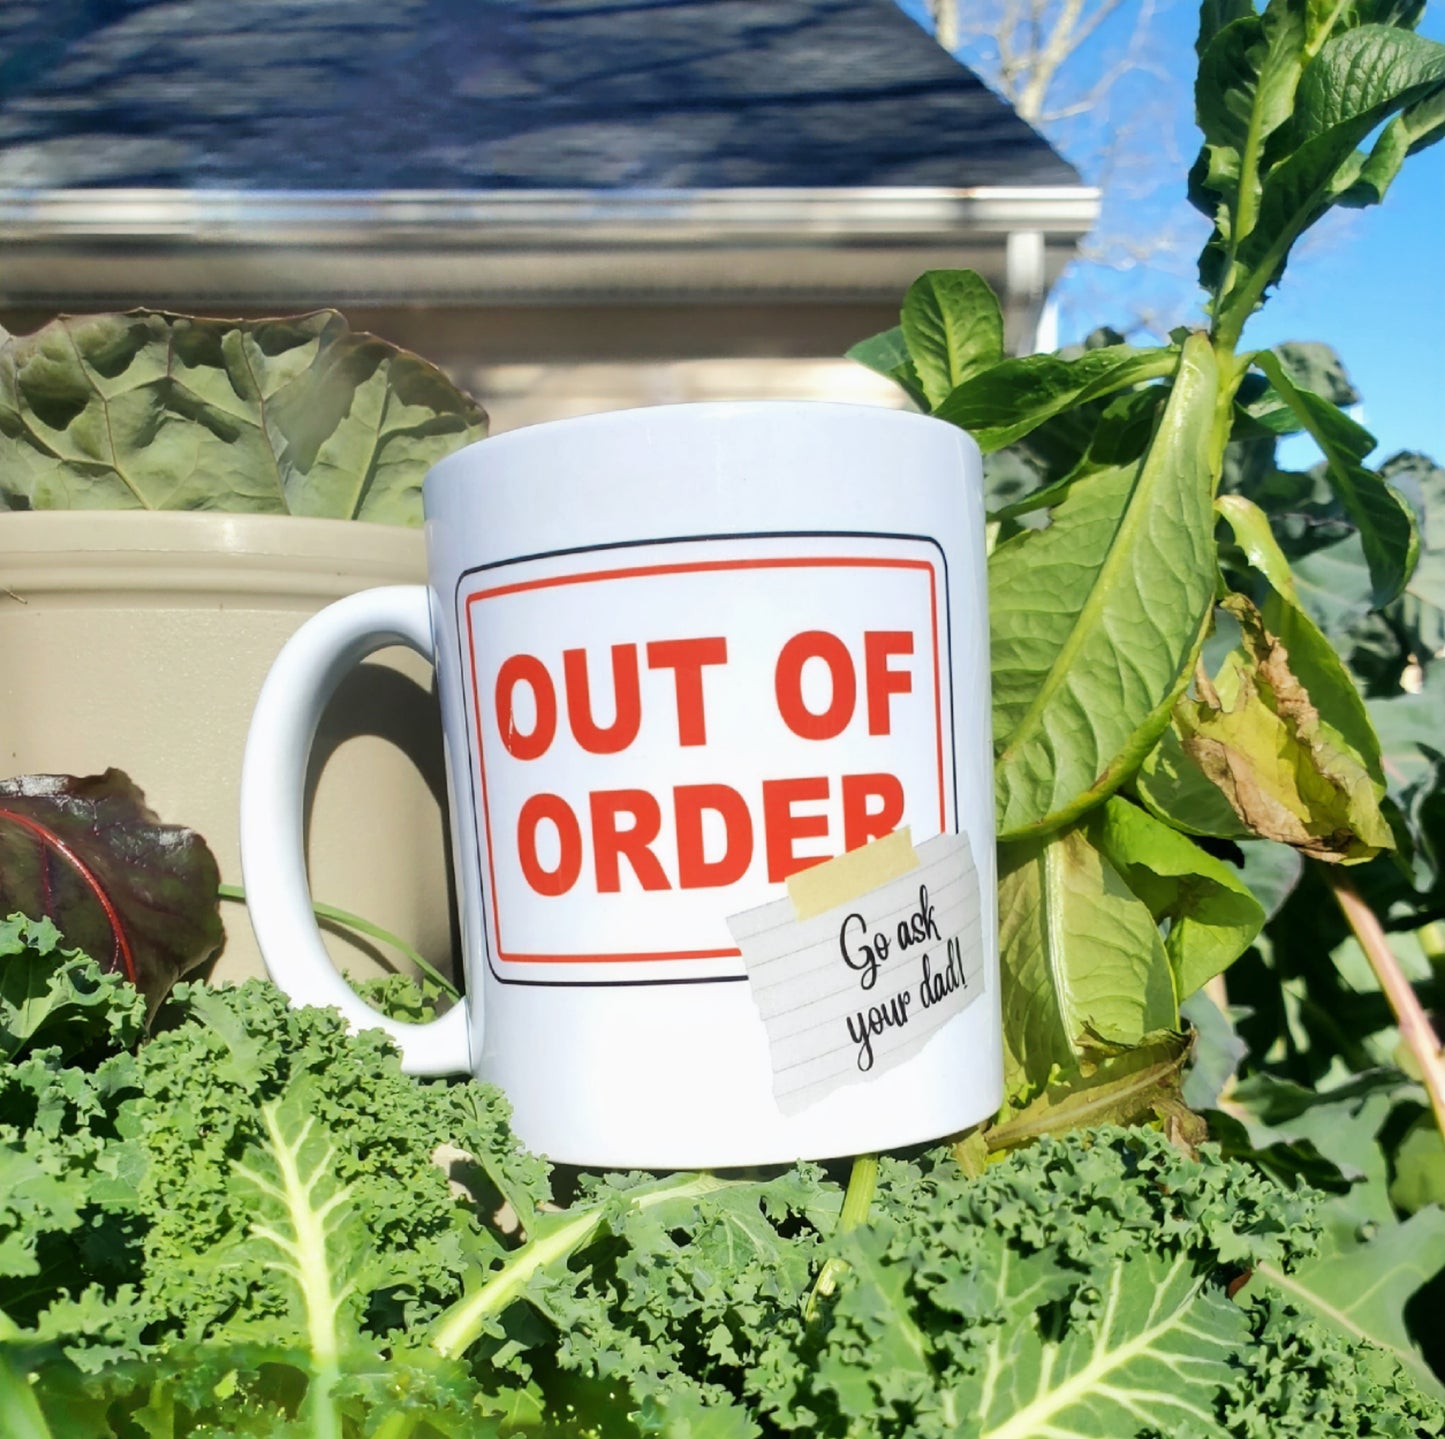 Sarcastic Mug "OUT OF ORDER..go ask your dad"